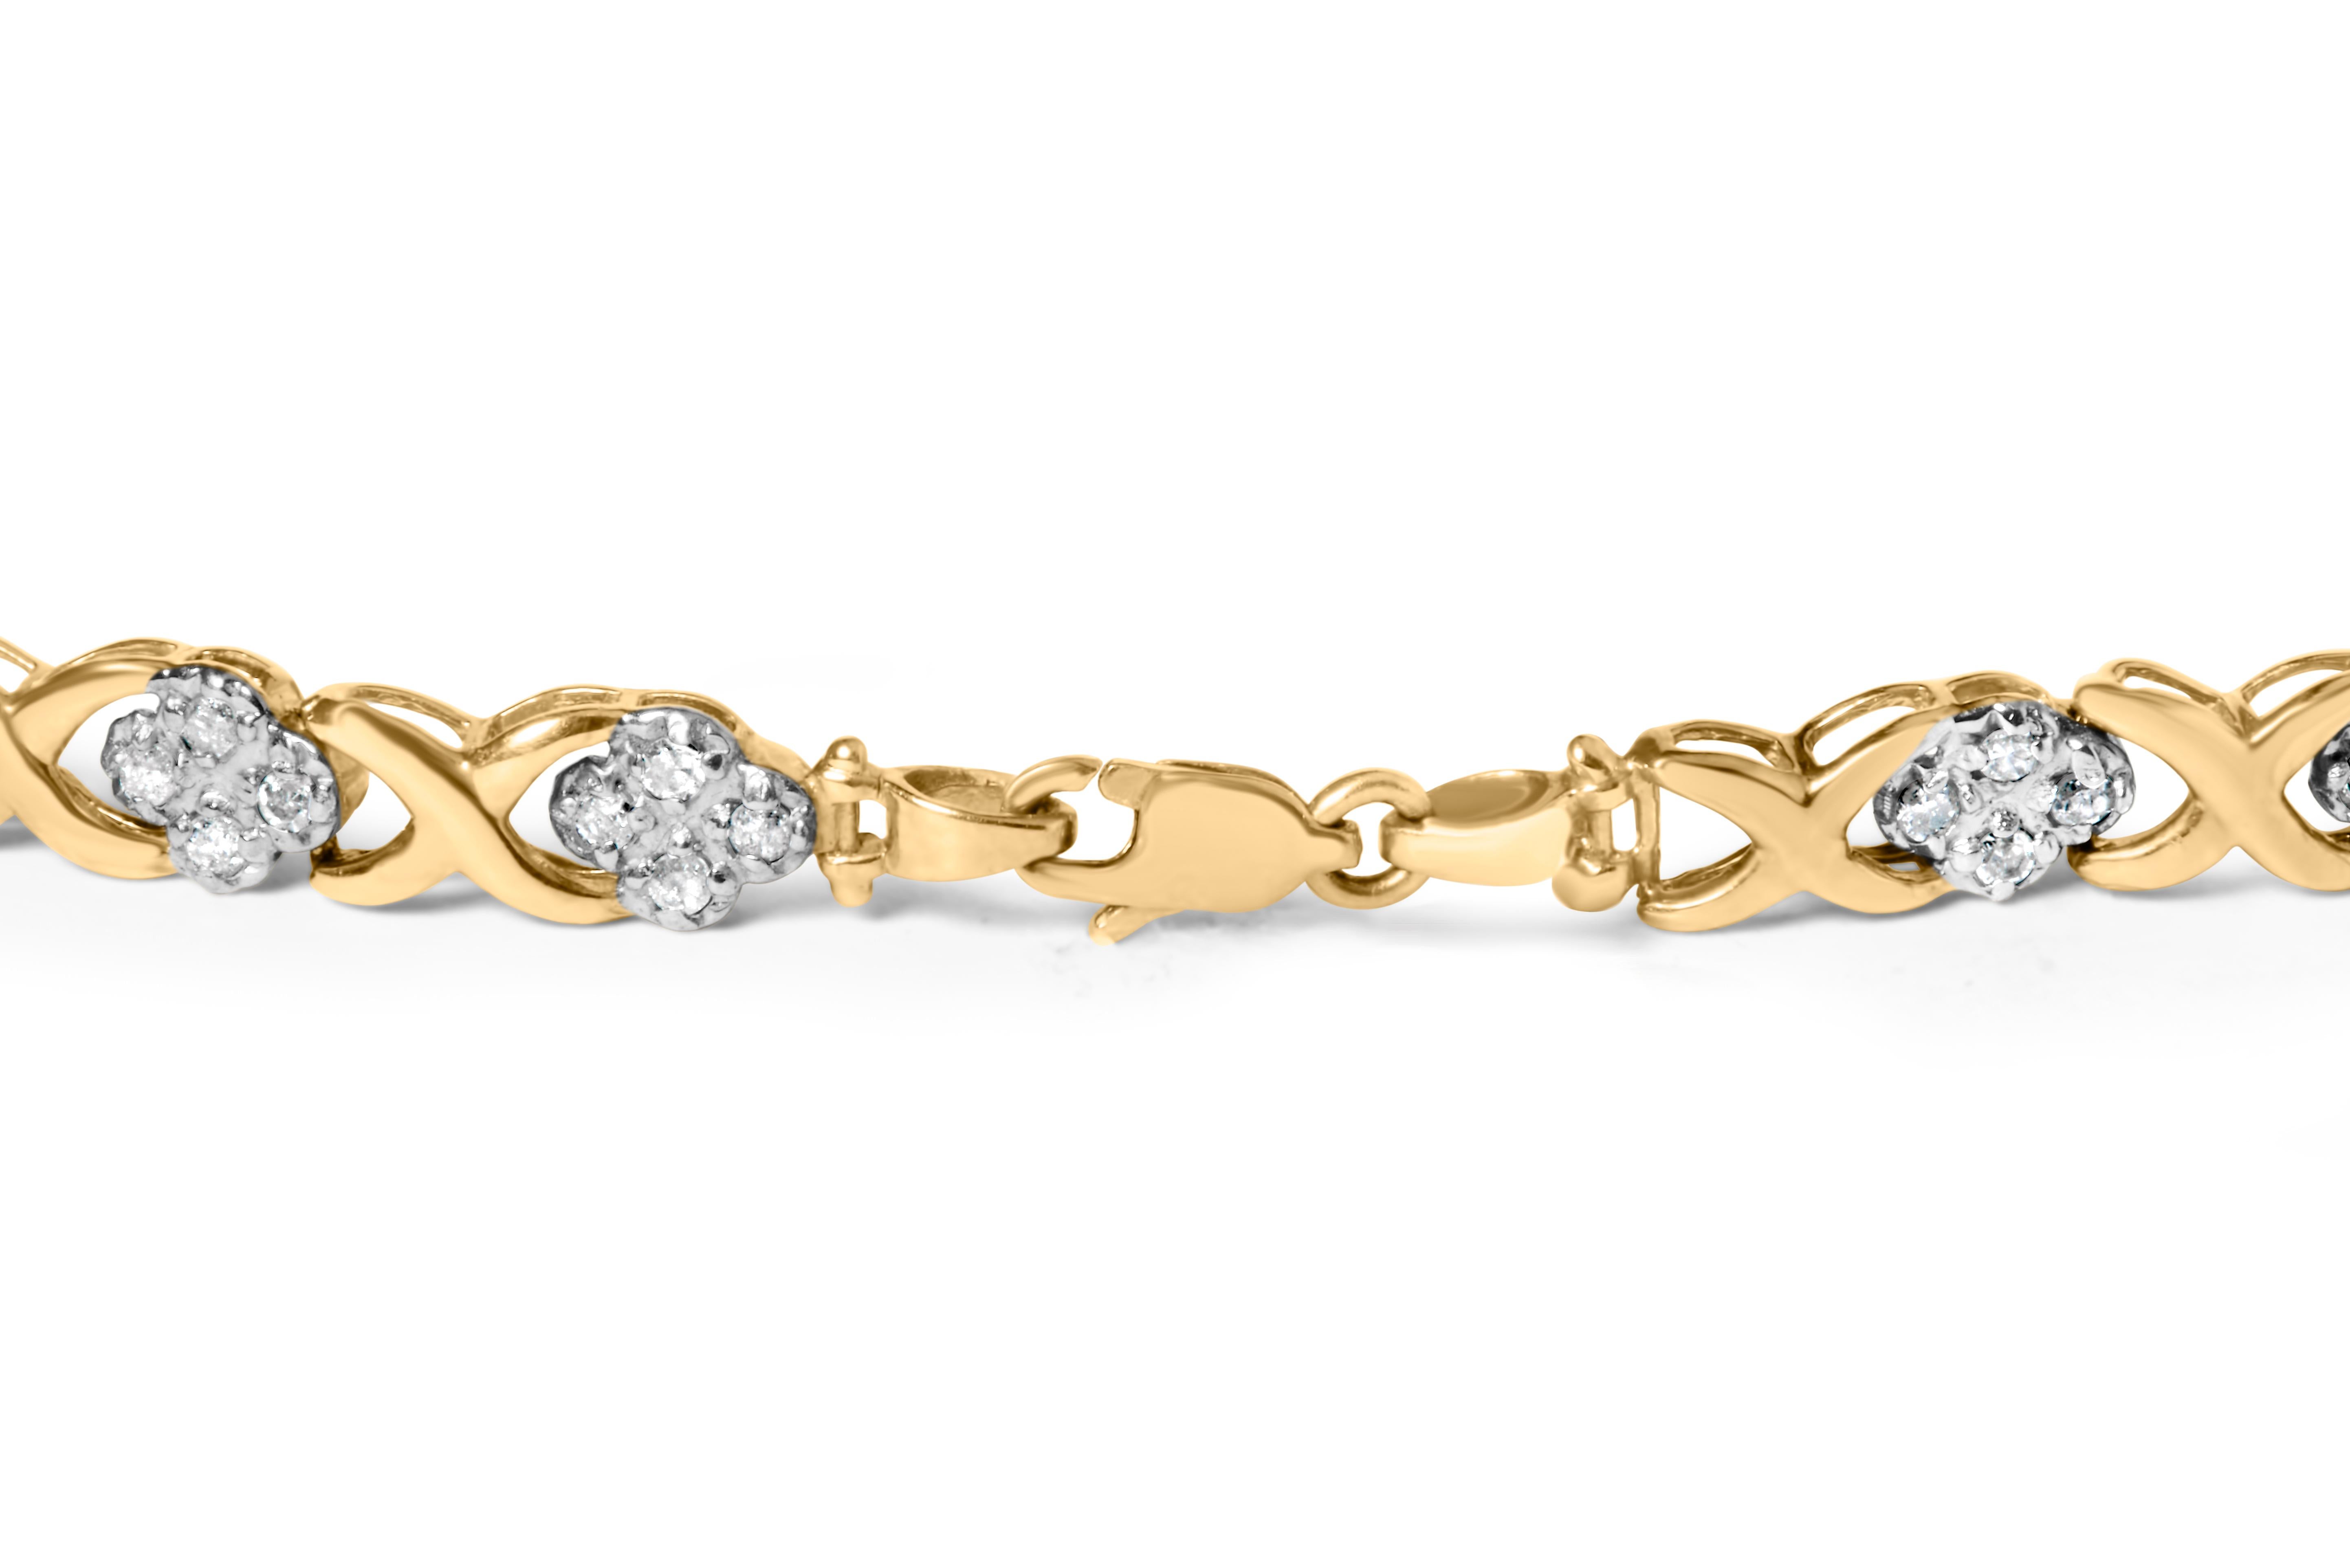 Elegant and timeless, this gorgeous 10K yellow gold tennis bracelet features 1 carat total weight of round, rose cut, promo quality diamonds with a whopping 64 stones in all. Rose-cut, promo quality diamonds are milky and cloudy in nature. The